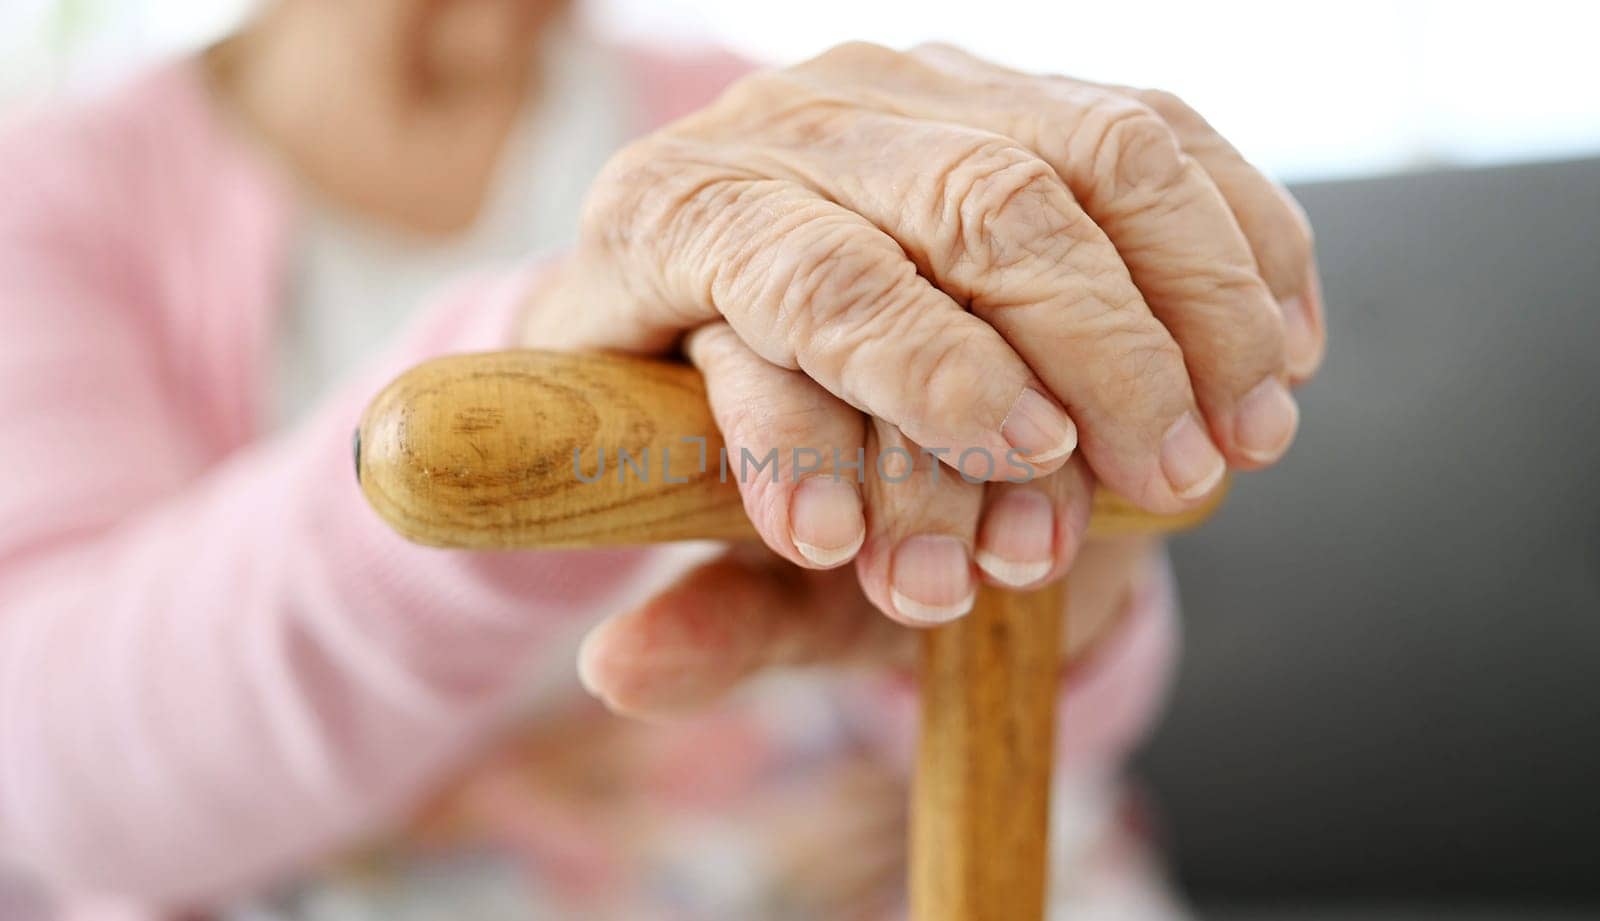 Hands Of Old Woman With Cane, Close Up View